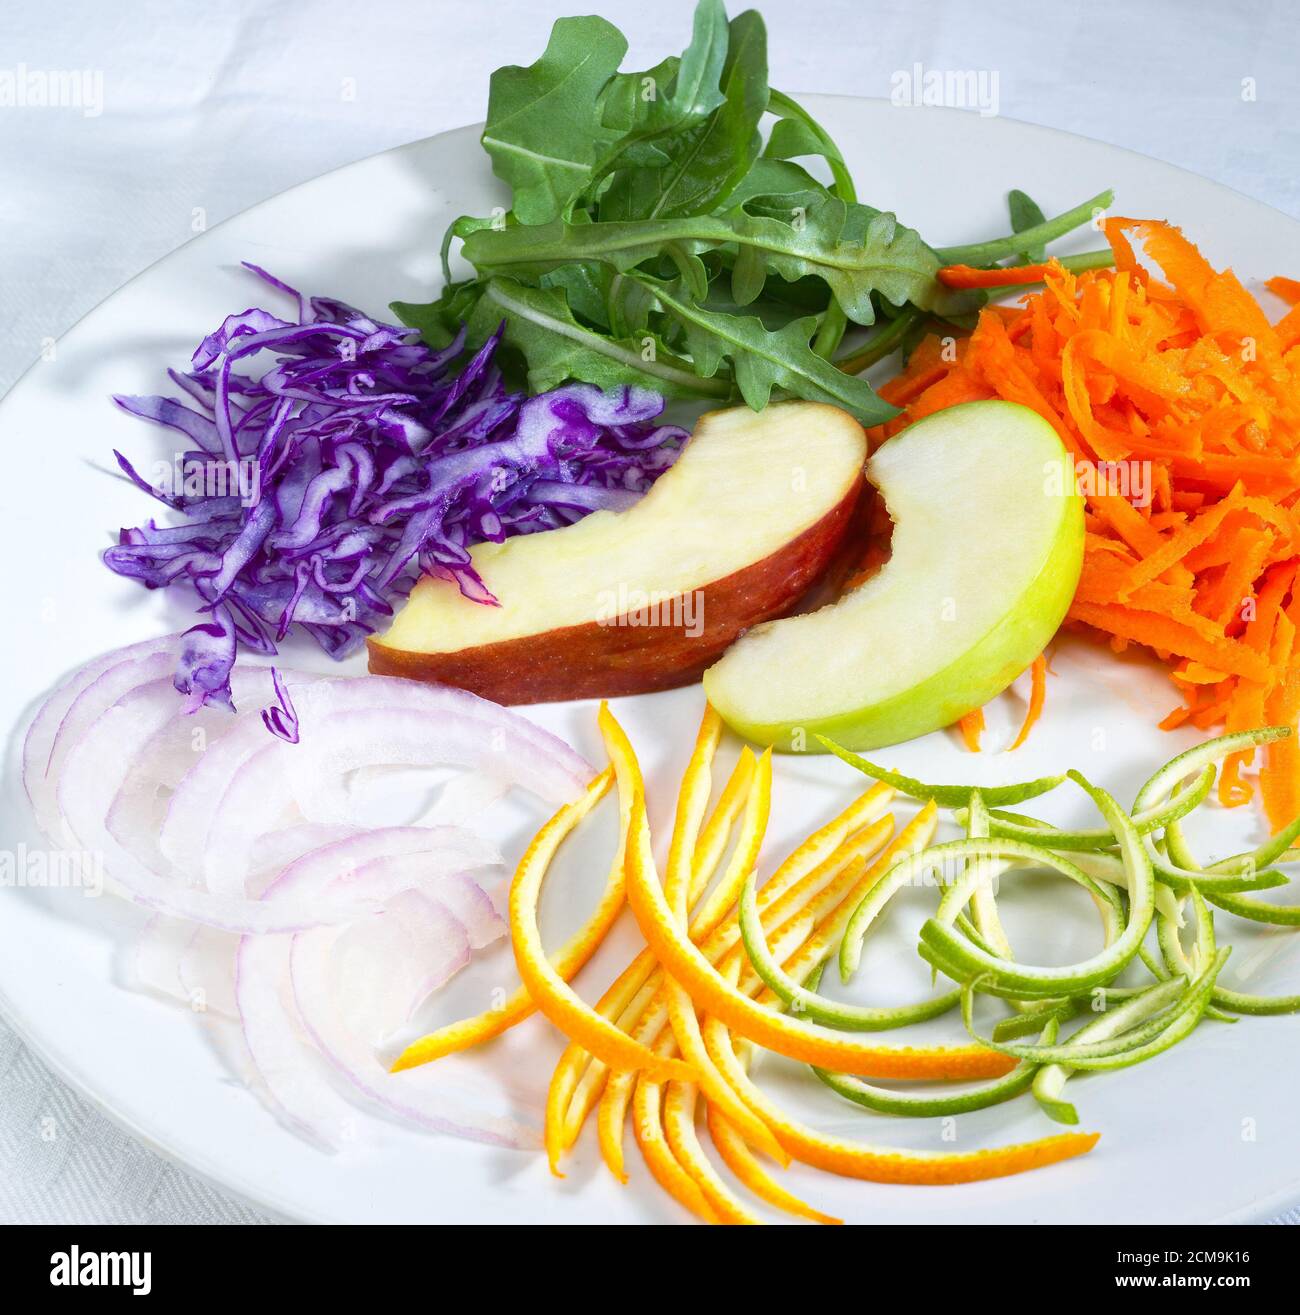 salad ingredient on a plate Stock Photo